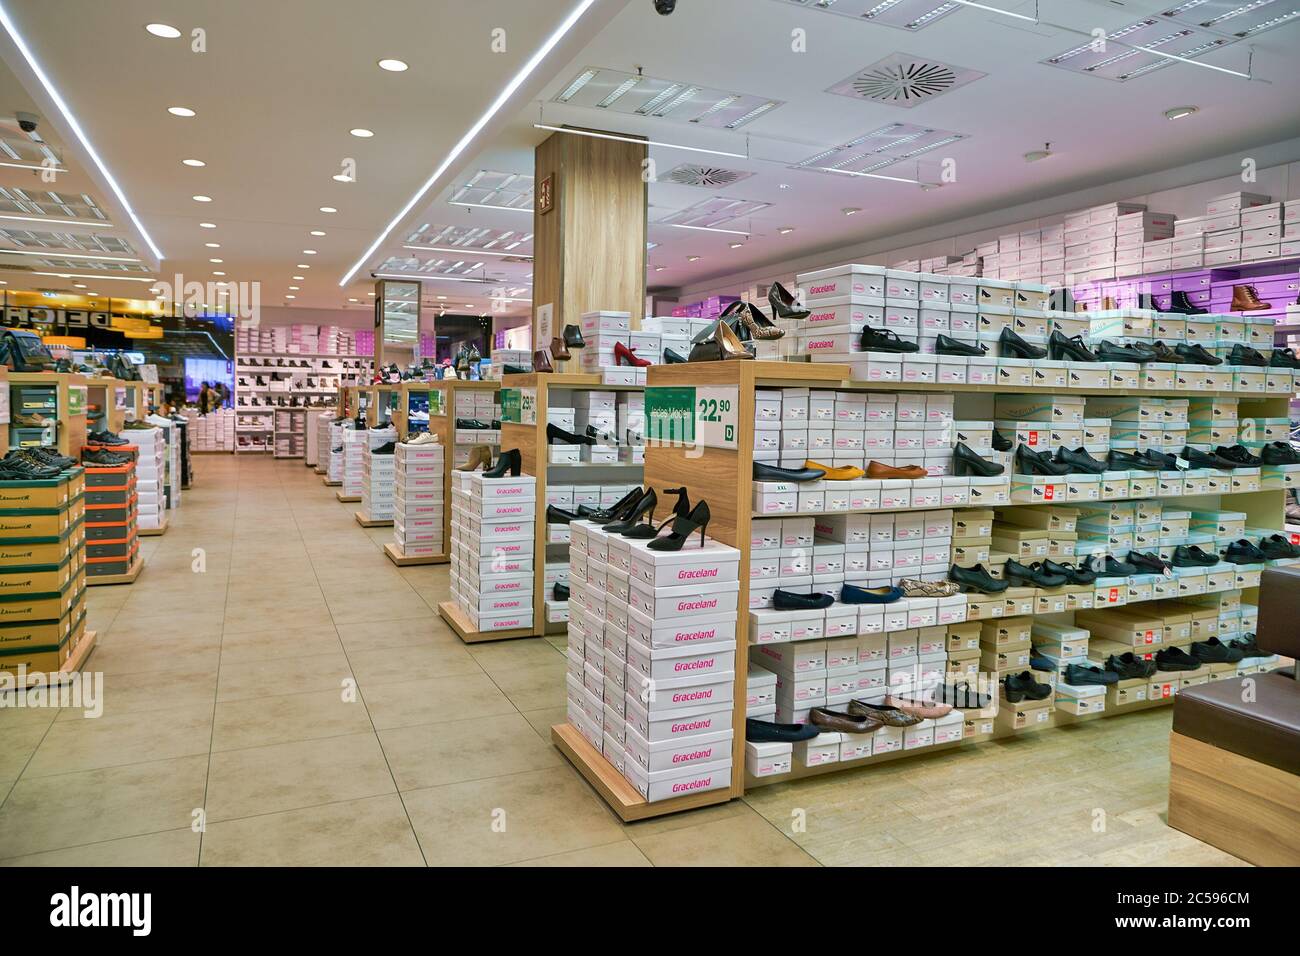 Deichmann Shoes High Resolution Stock Photography and Images - Alamy